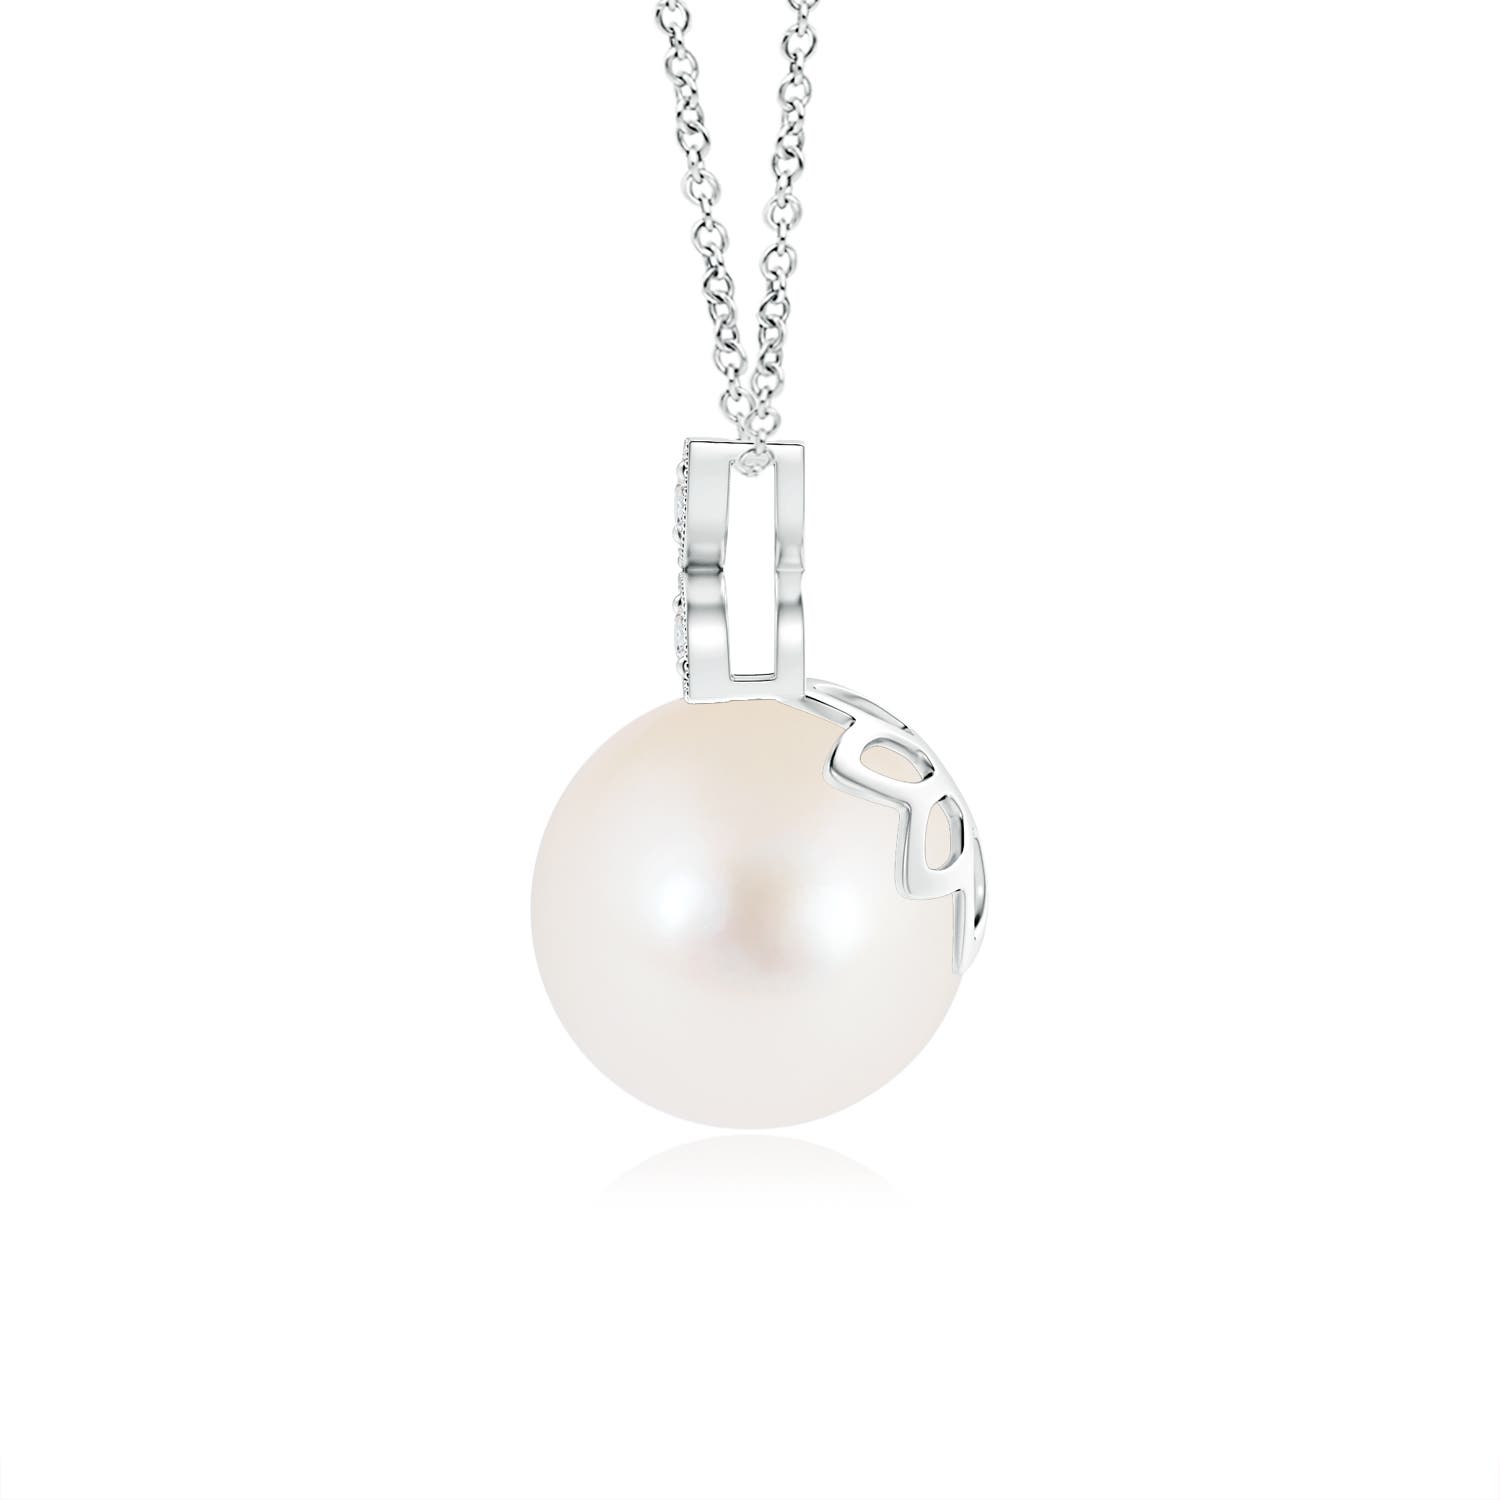 AAA - Freshwater Cultured Pearl / 3.75 CT / 14 KT White Gold